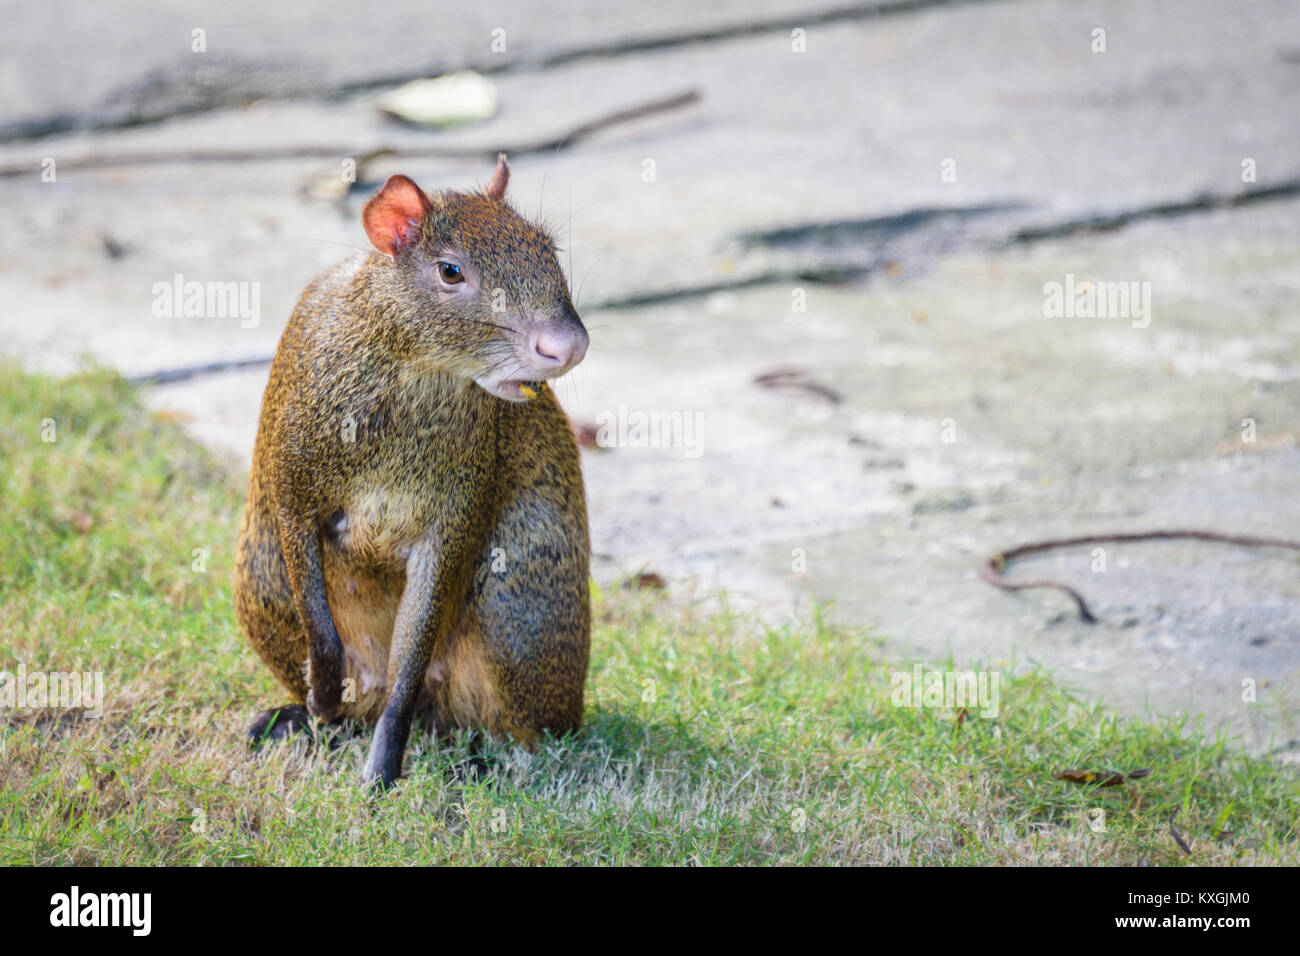 Agouti agoutis or Sereque rodent sitting on the grass. Rodents of the Caribbean. Stock Photo